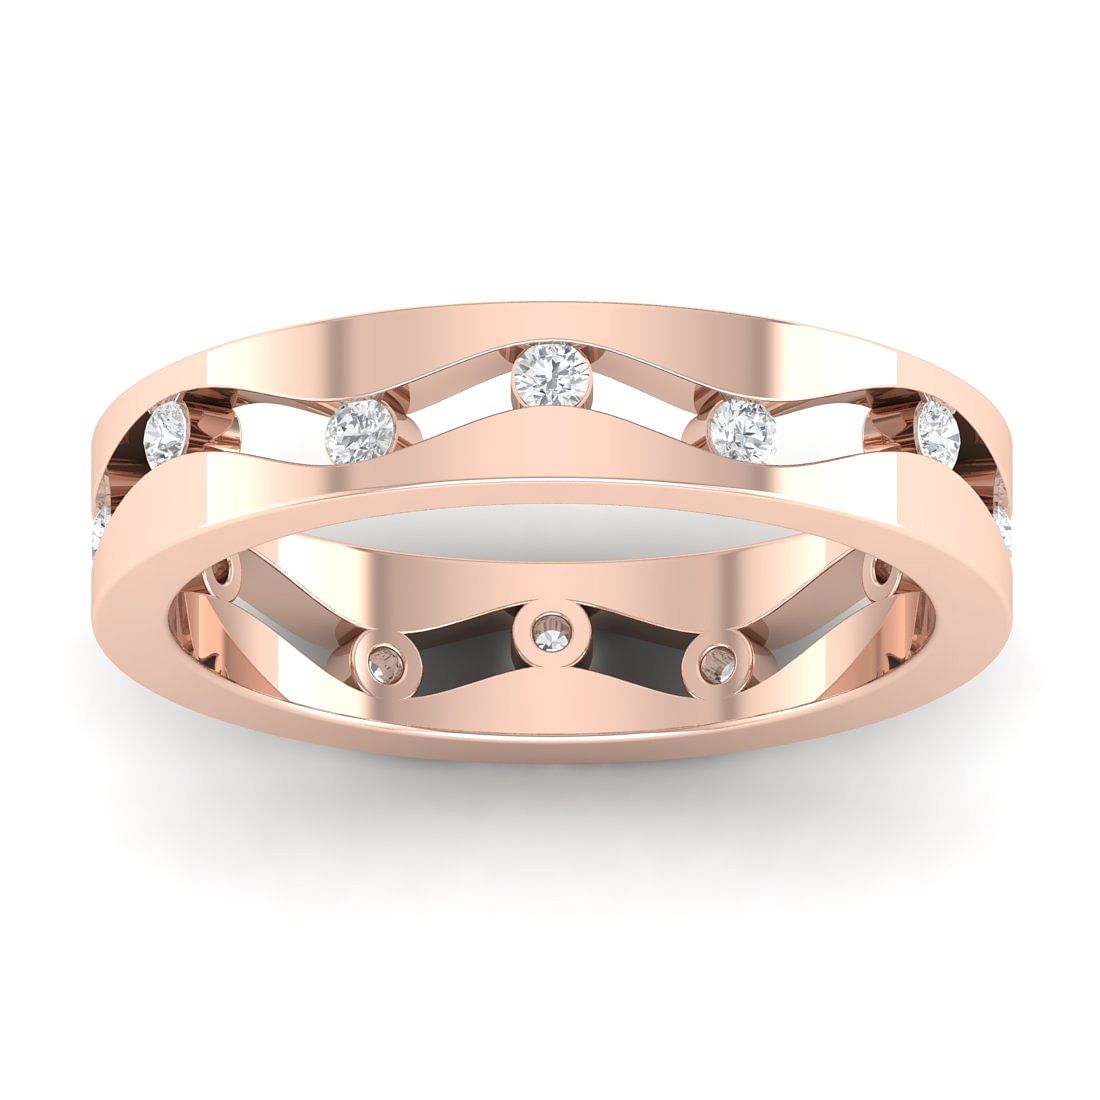 Cupid for COVID: Customise Your Solitaire Engagement Ring From The Comfort  Of Your Home | WeddingBazaar